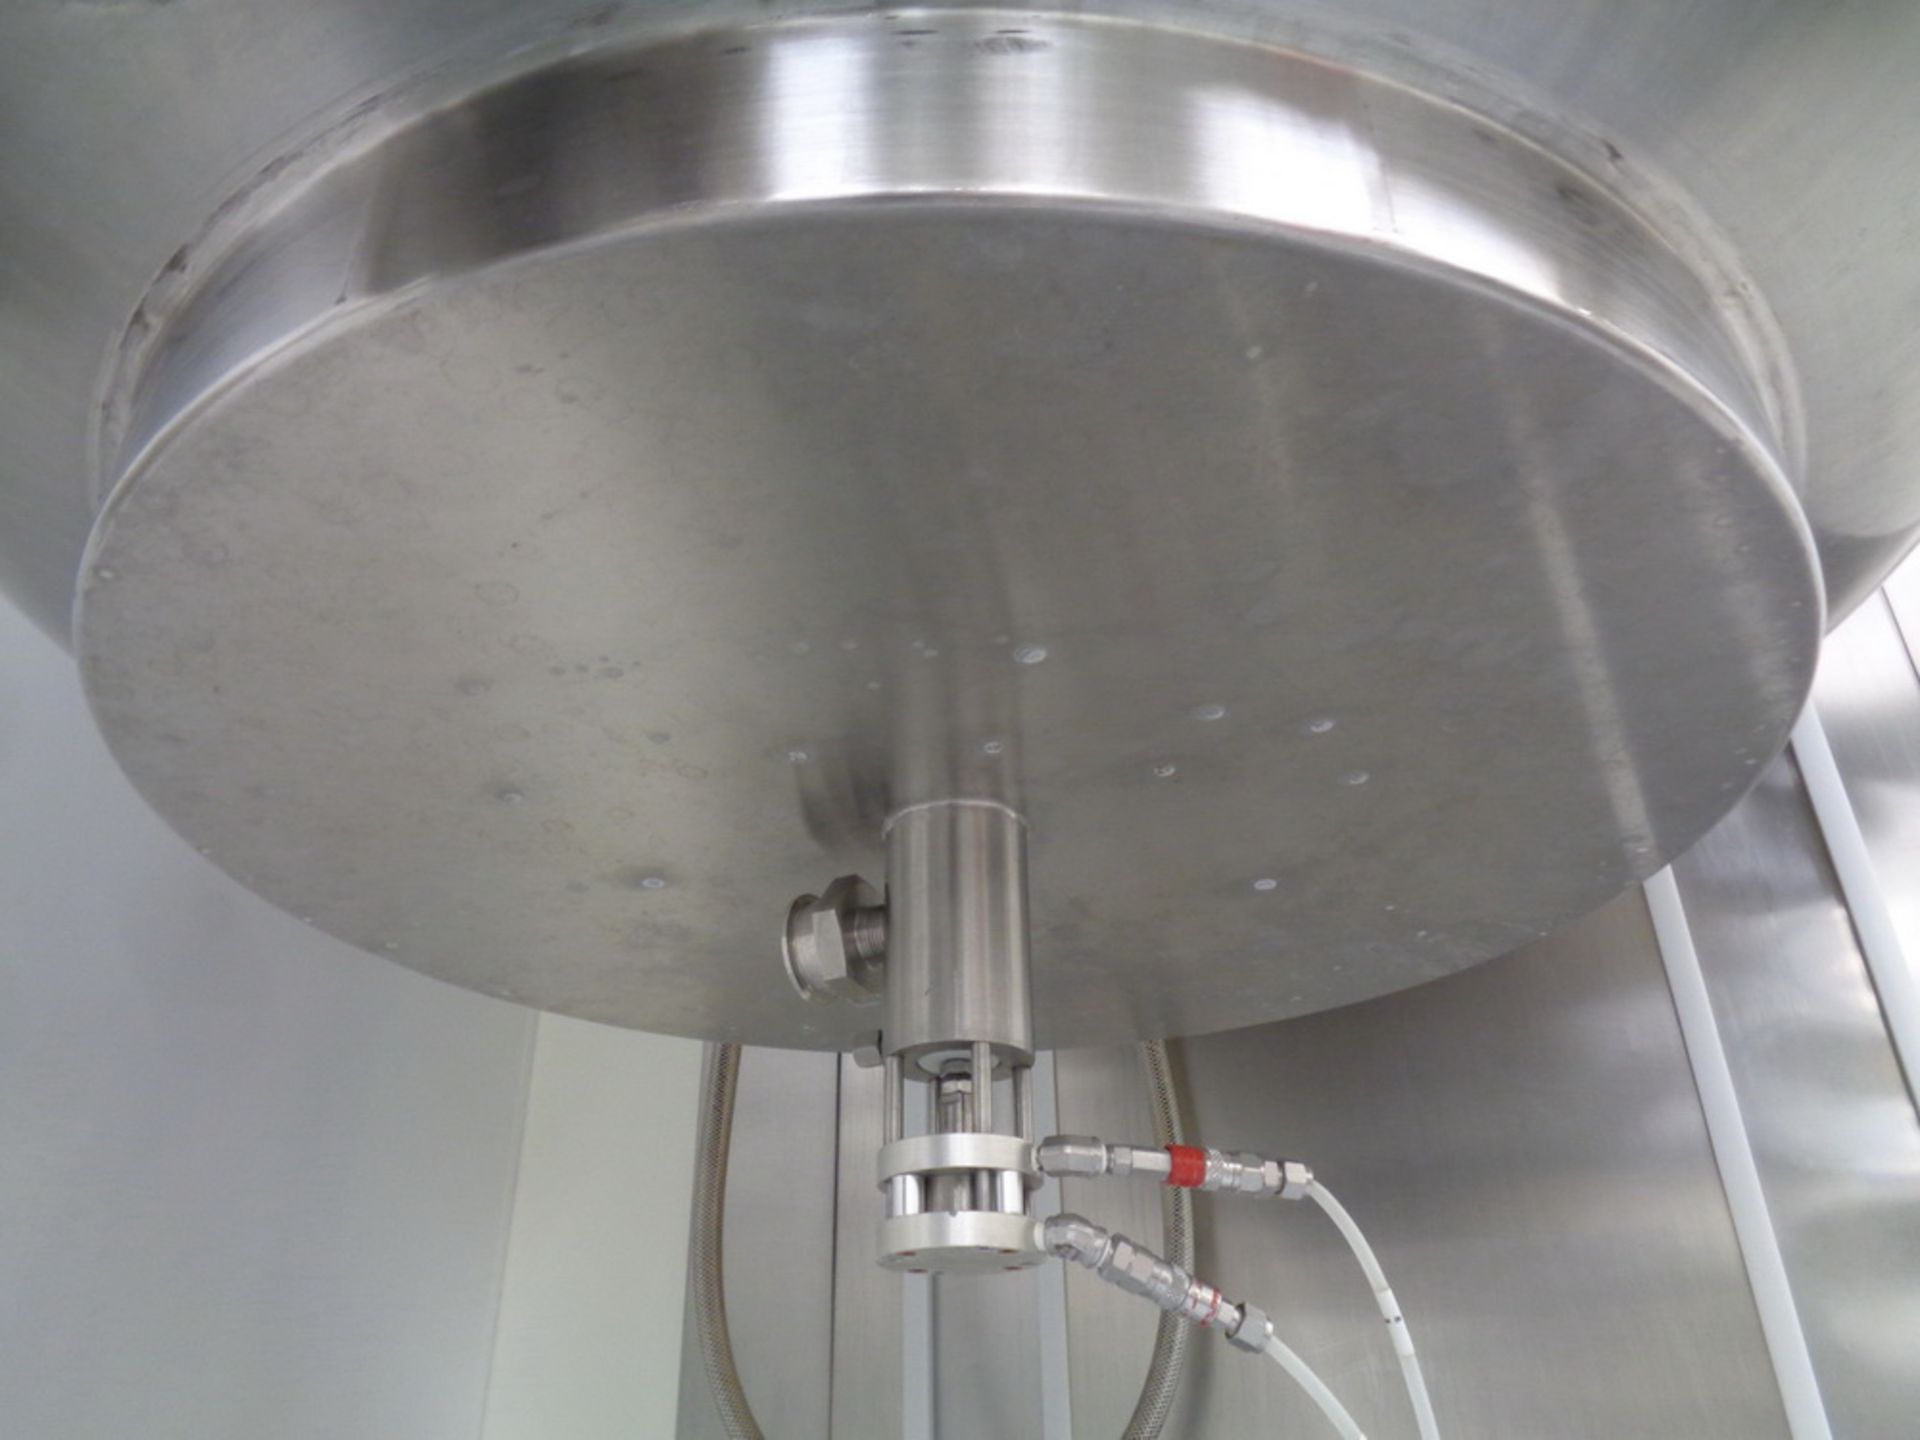 Vector High Shear Granulating Mixer, Model GMX-600, stainless steel construction, 600 liter bowl, - Image 7 of 20